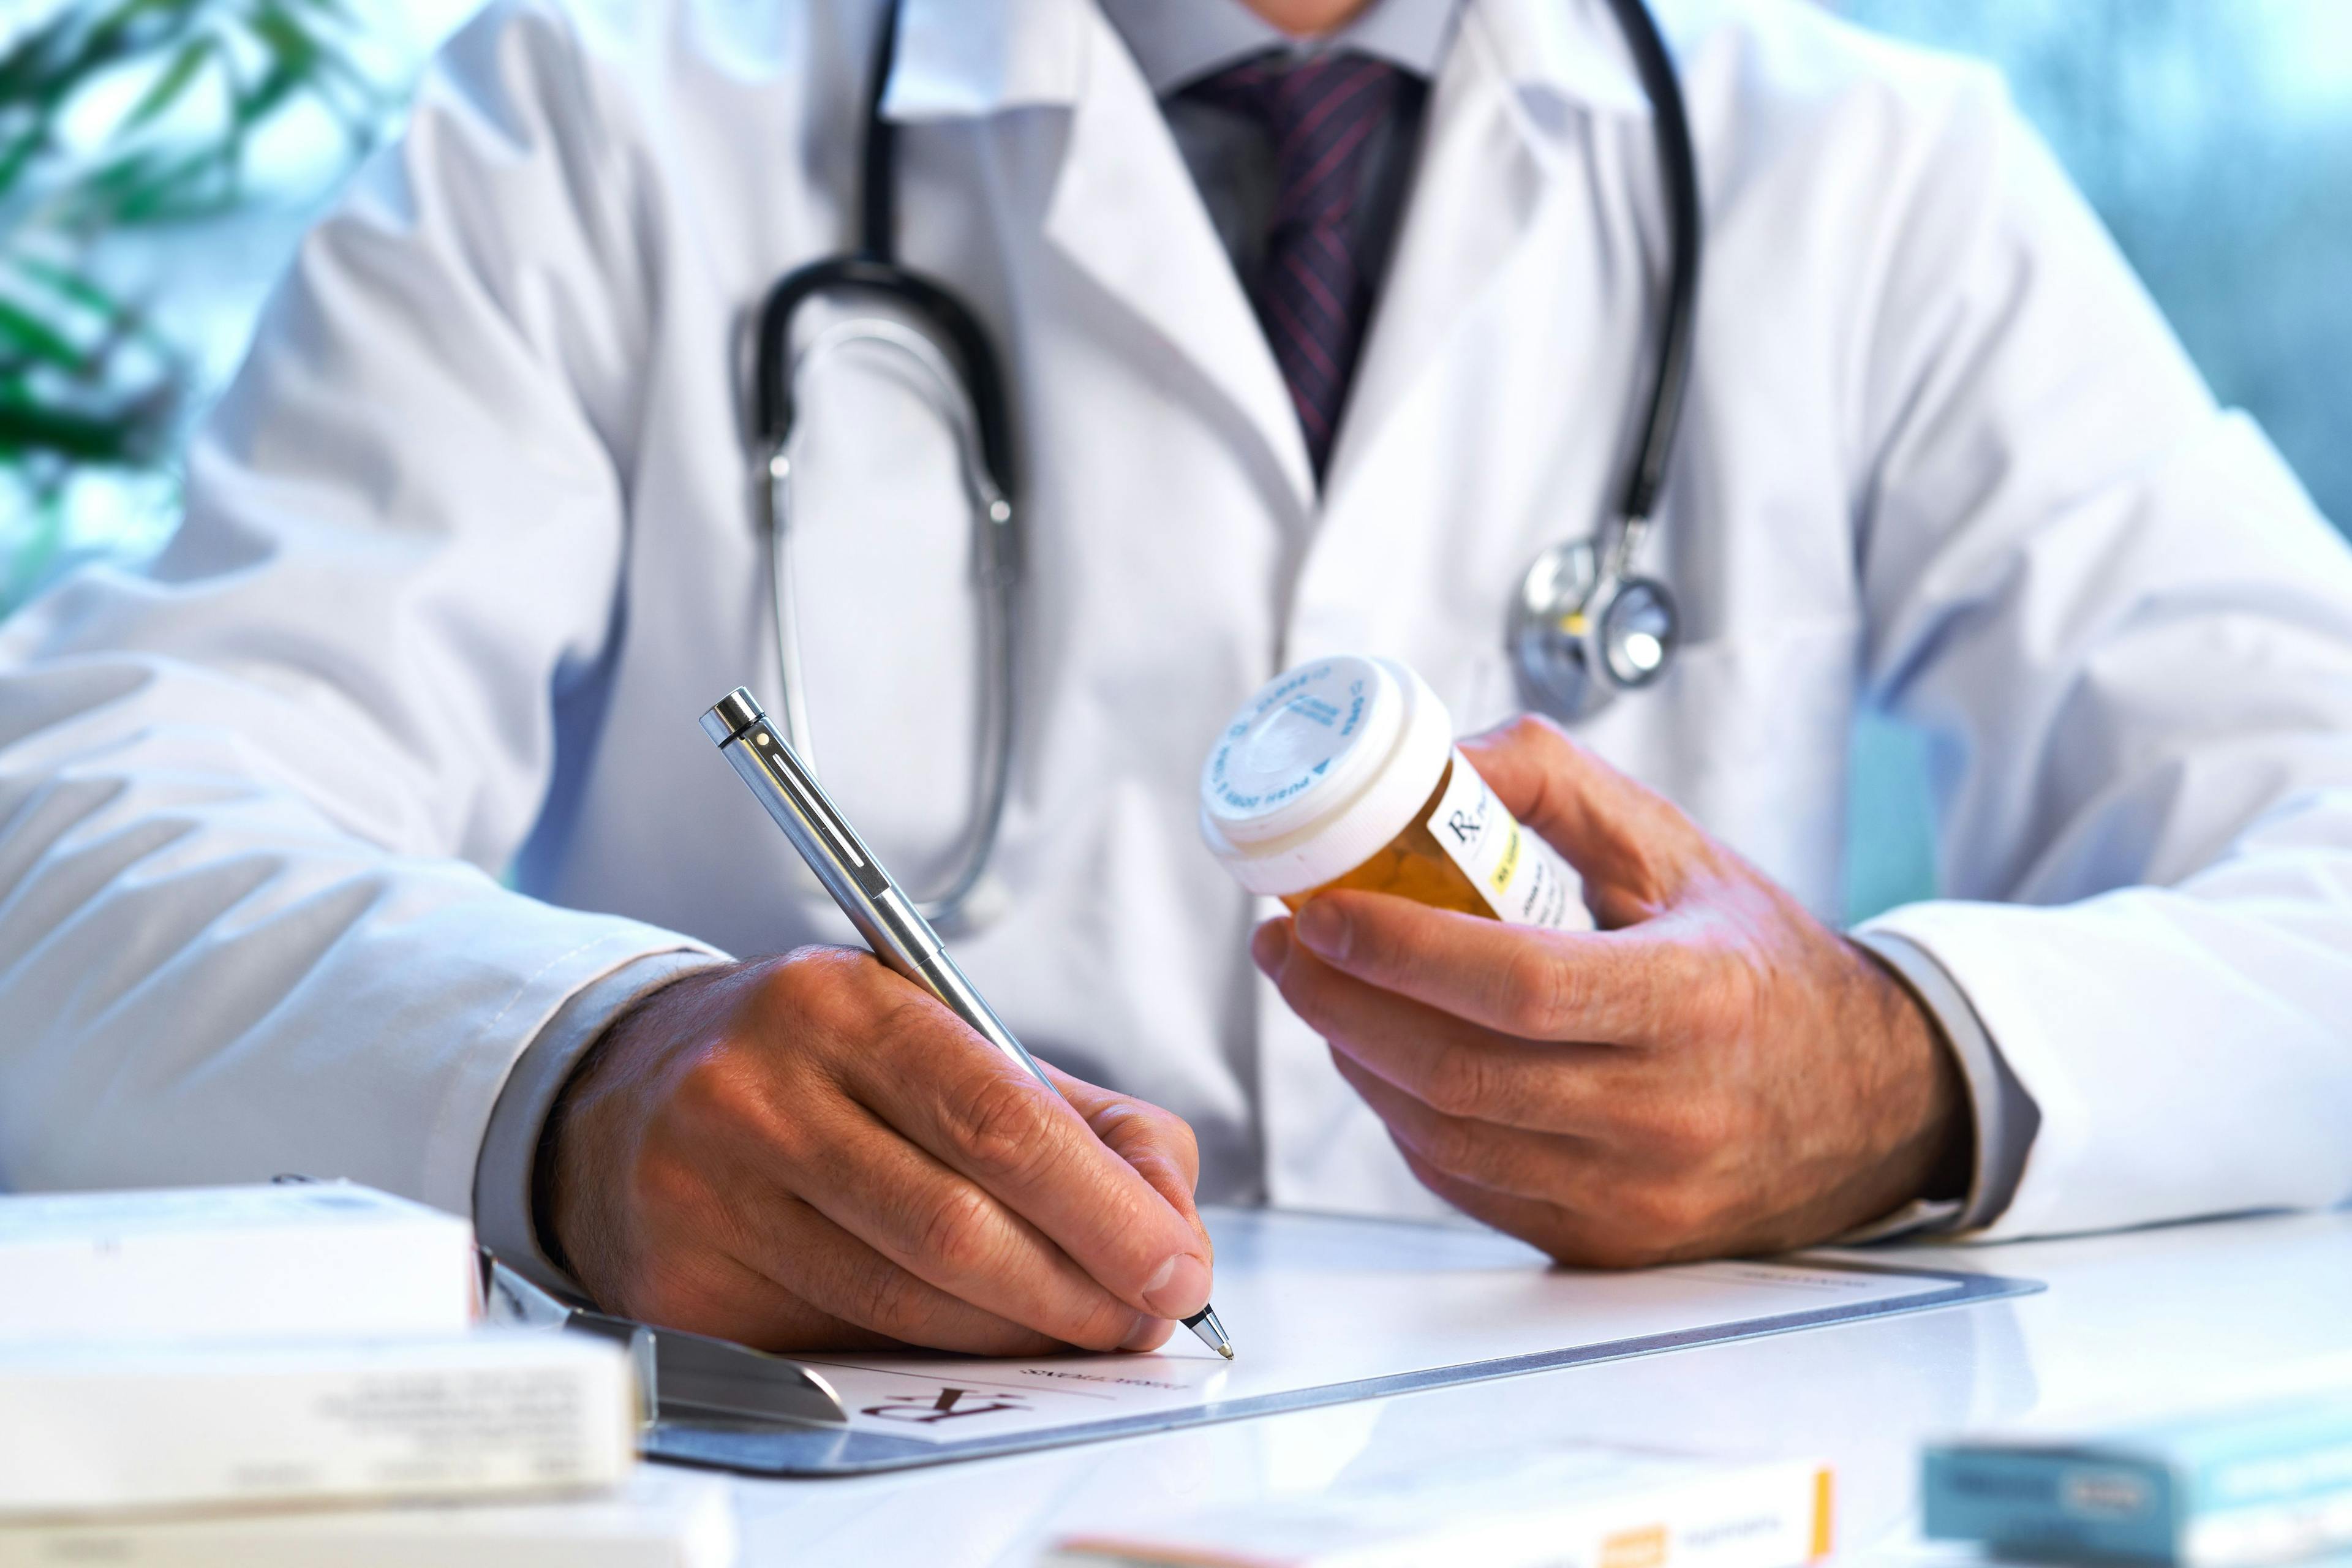 Pharmacists Should Take a Proactive Approach When Addressing Controlled Substance Concerns